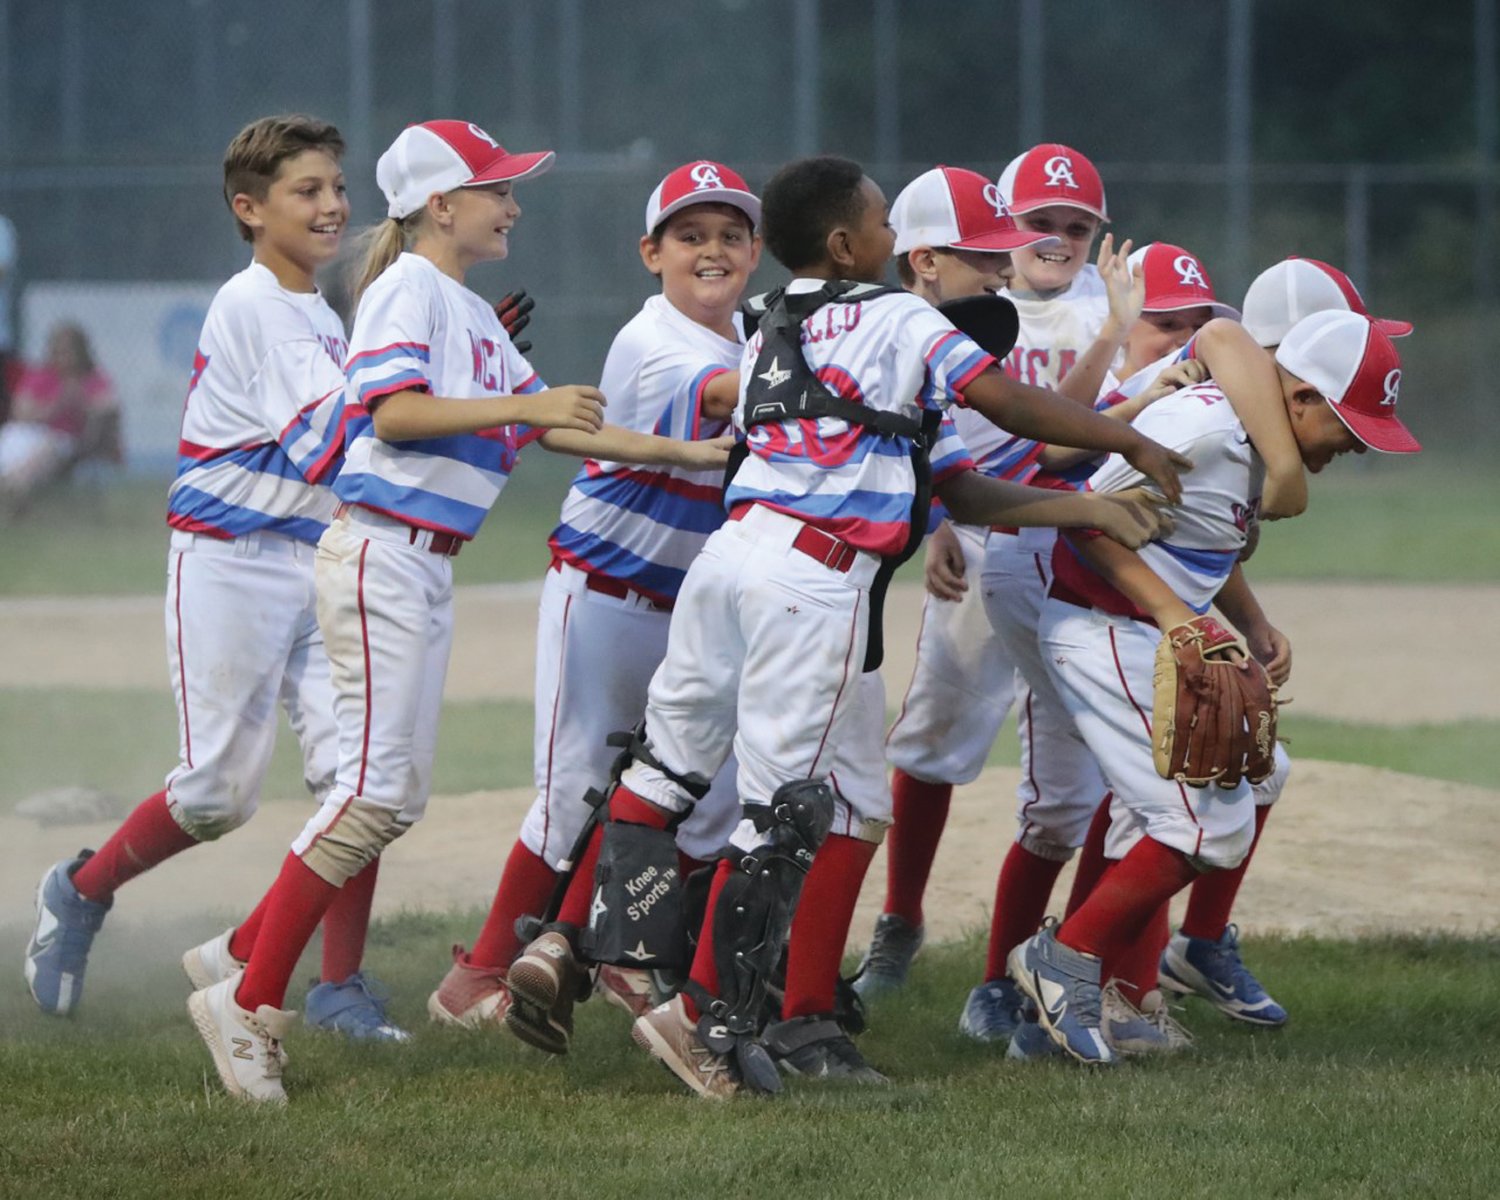 HEADED TO STATES: The WCA 10 year old team celebrates after winning the District I Championship last week against East Greenwich.